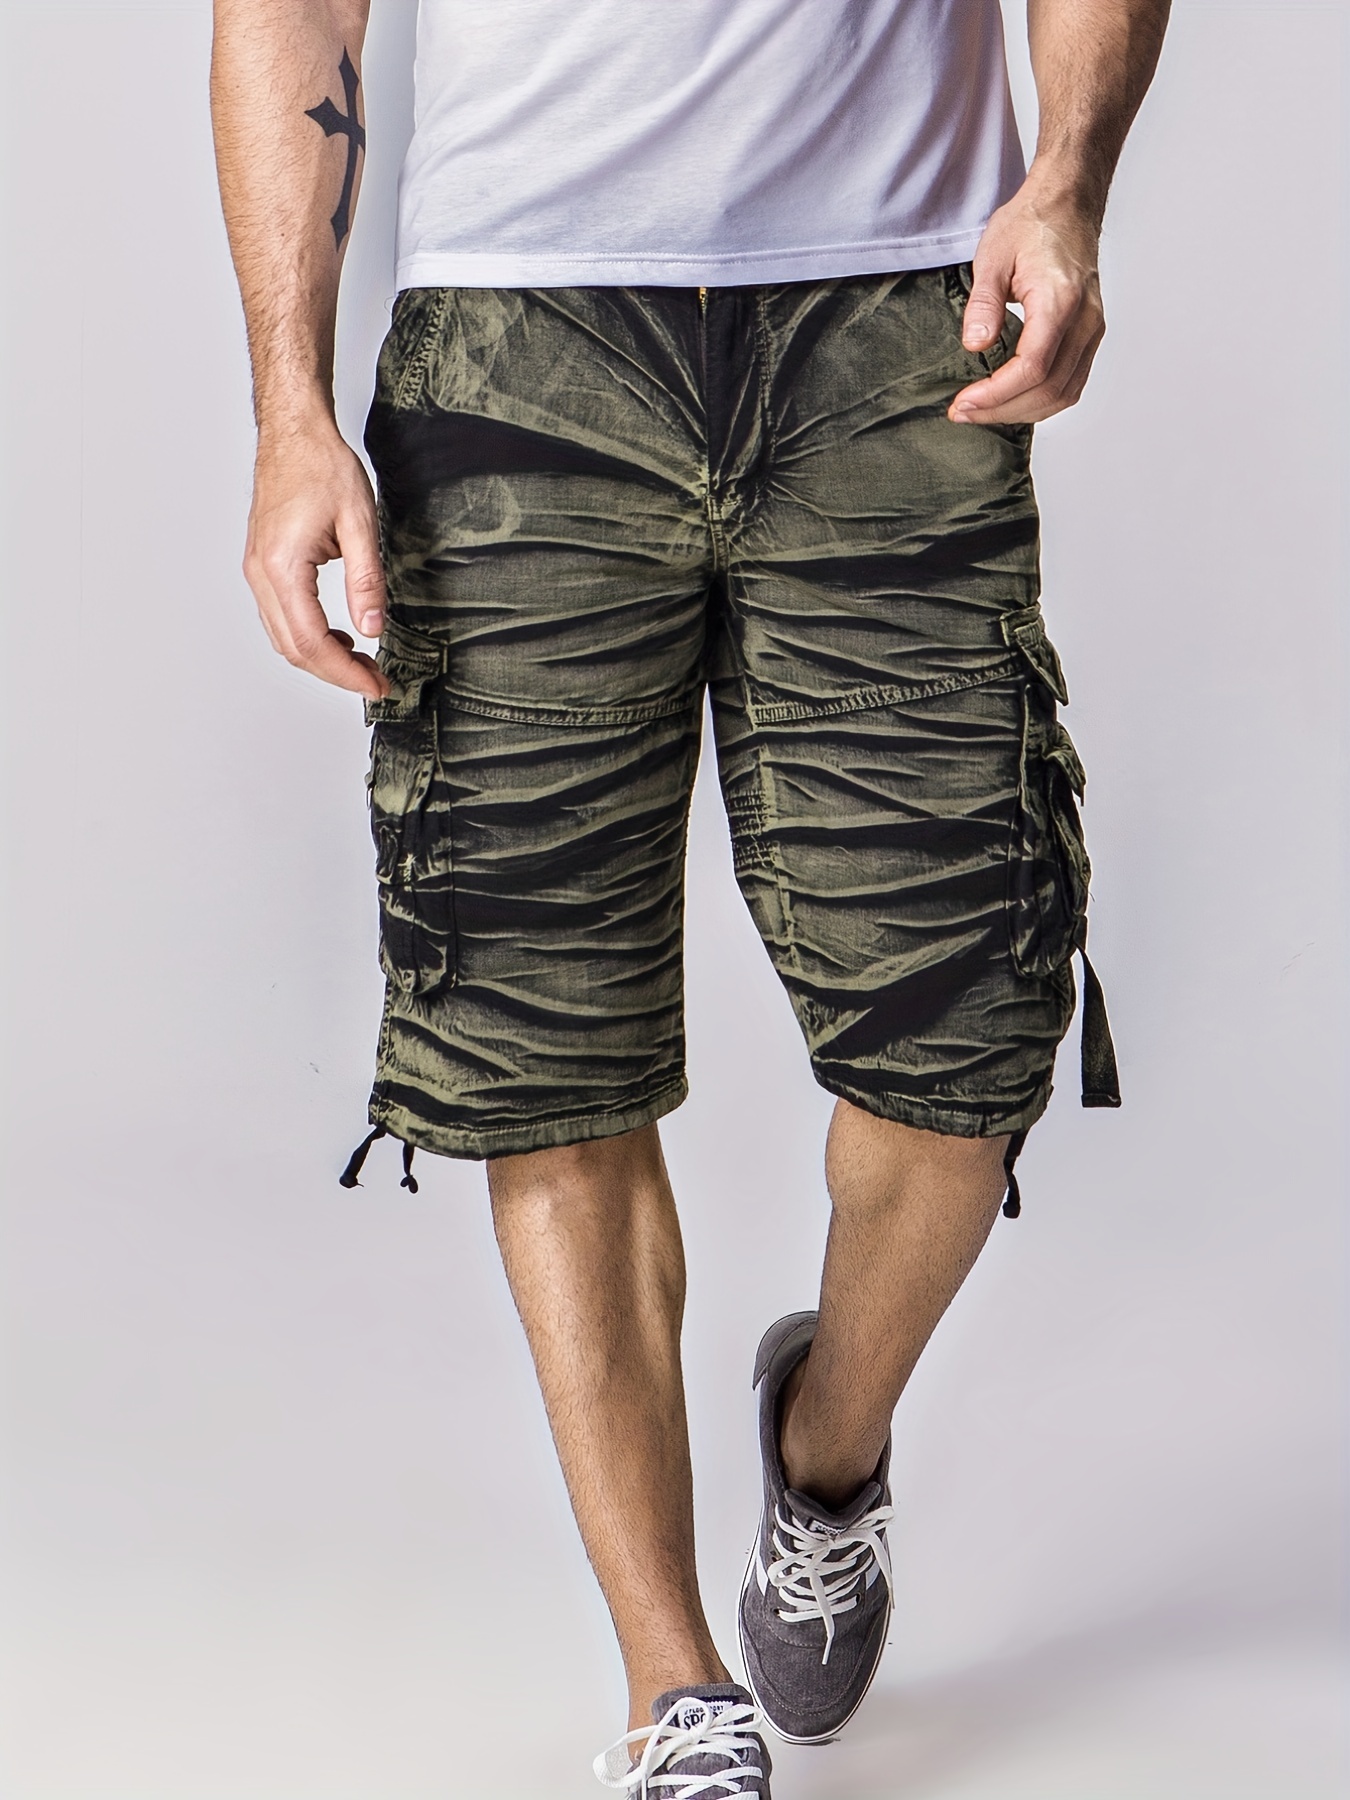 Men's Casual Multi-pocket Non Stretch Cotton Cargo Shorts, Male Clothes For  Summer